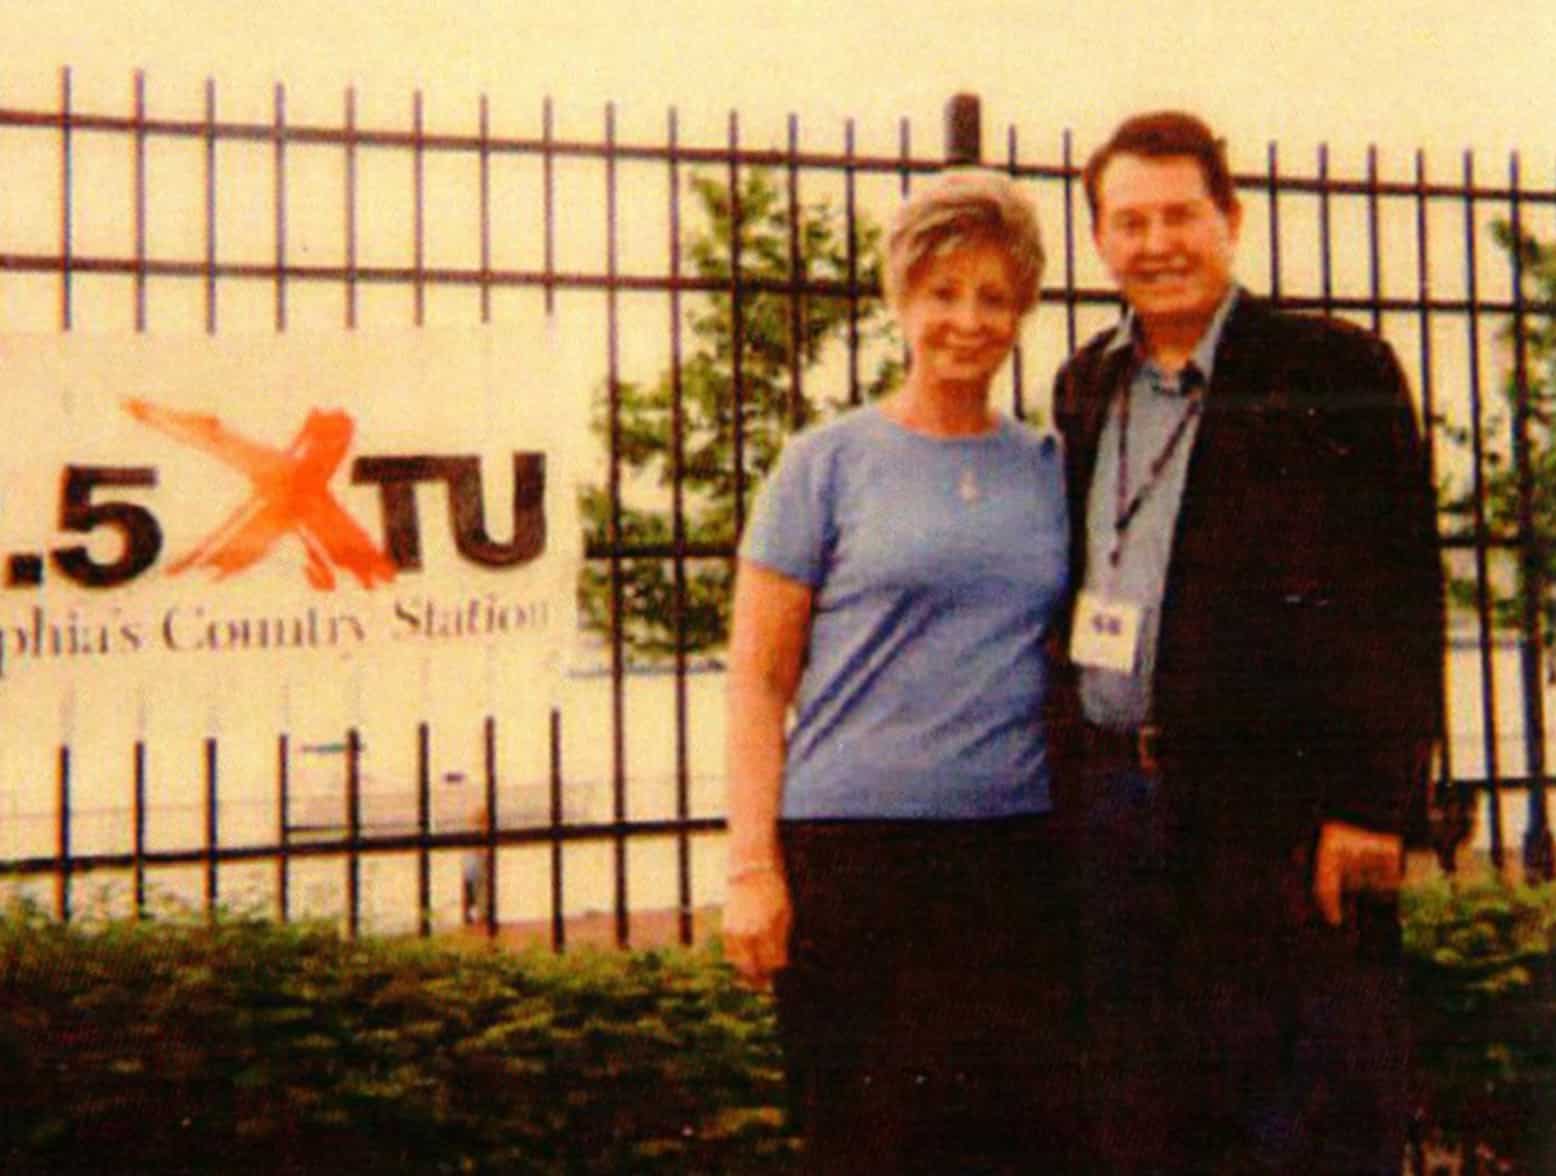 George and Ann Beasley in front of XTU sign